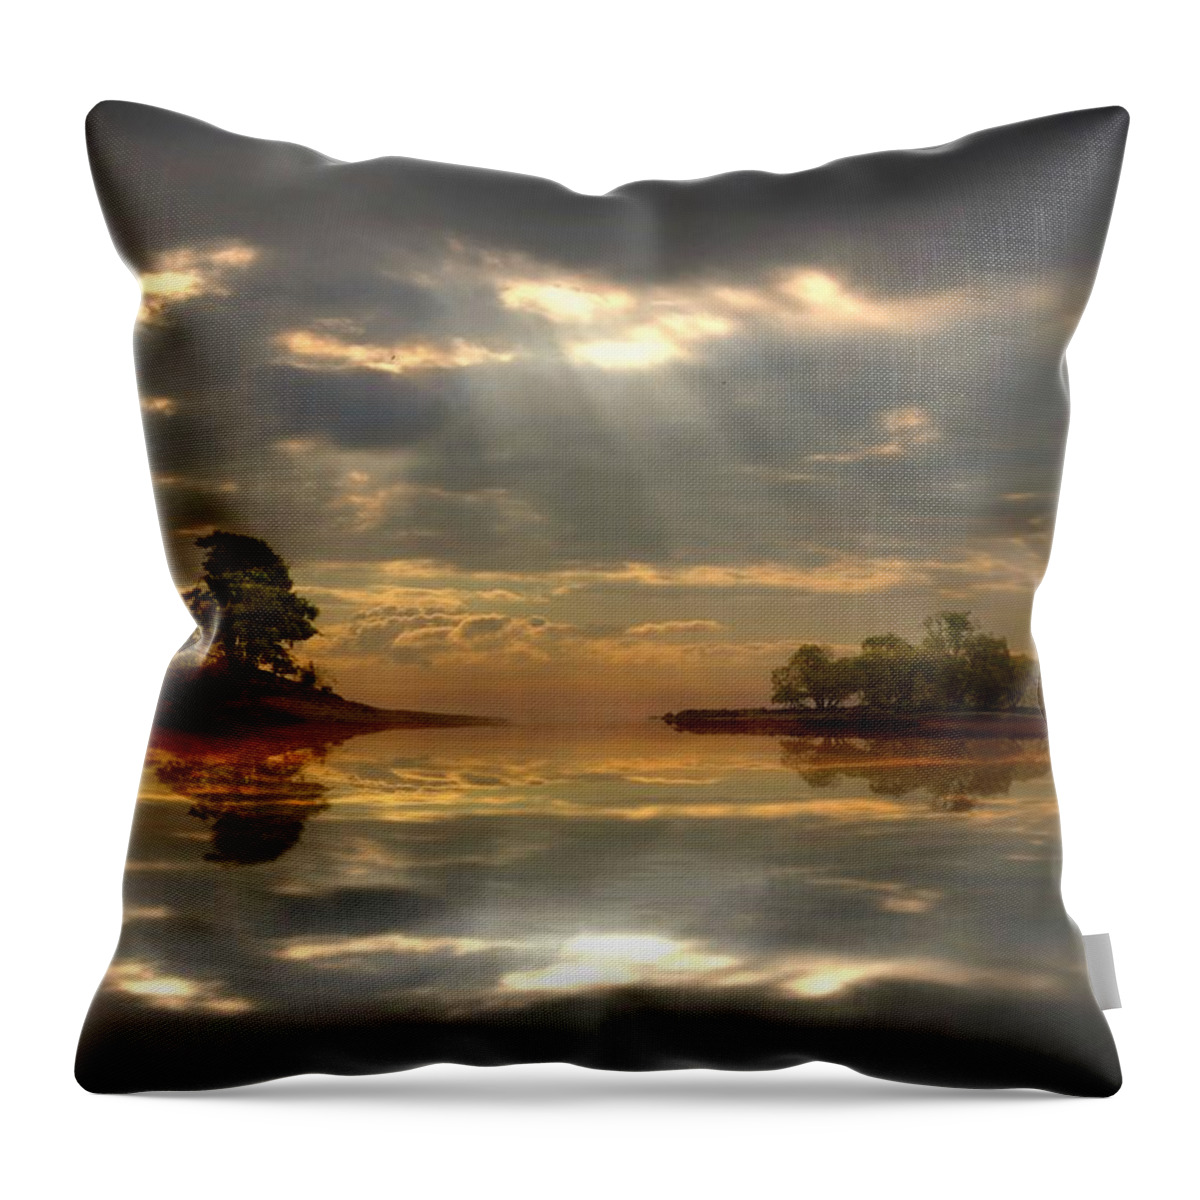 Dreamy Landscape Throw Pillow featuring the digital art Cloudy afternoon by Lilia D